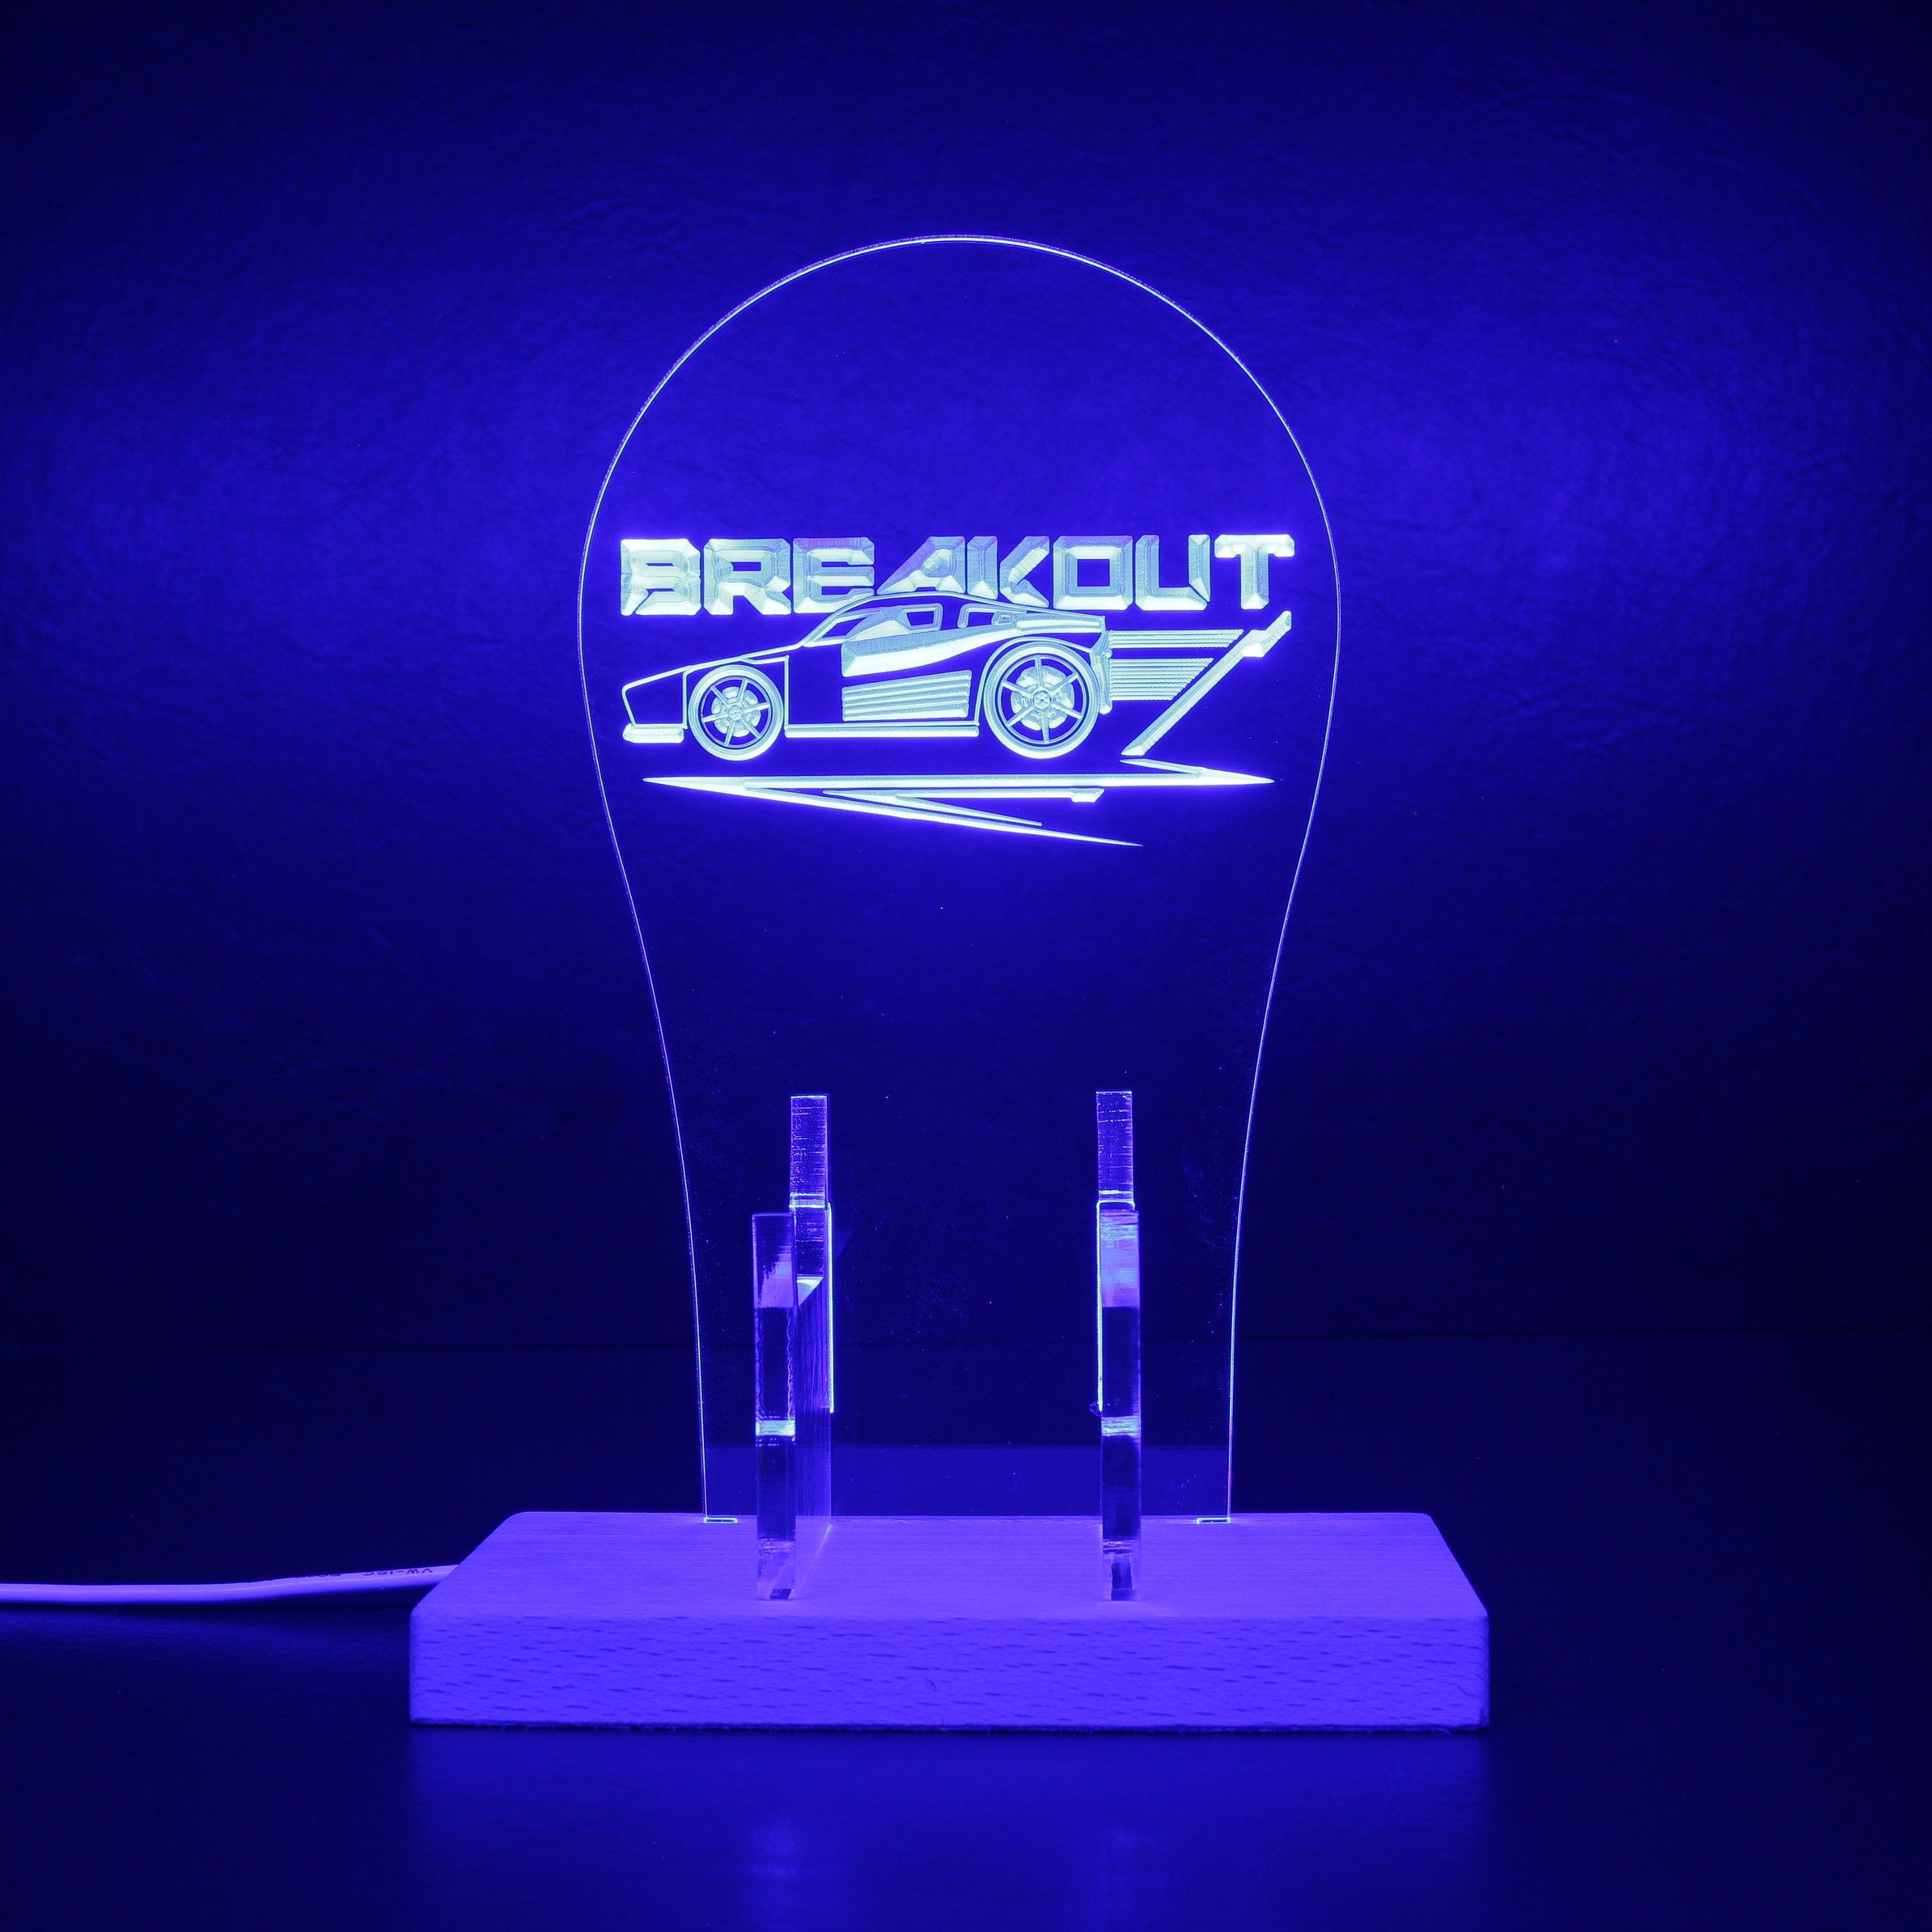 Rocket League Breakout LED Gaming Headset Controller Stand